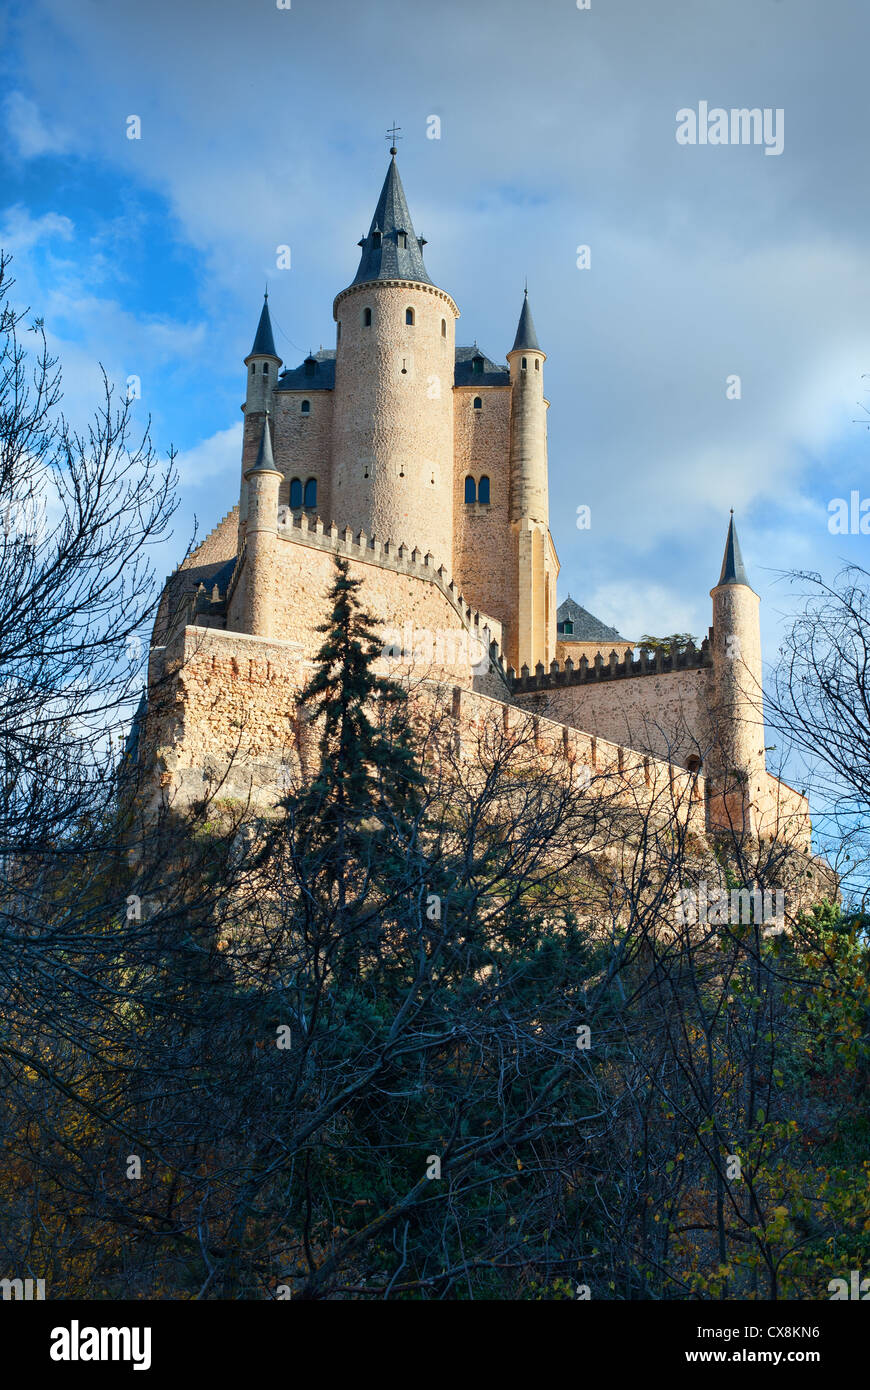 The famous Alcázar of Segovia, built on a rocks above the Eresma and Clamores rivers in the province of Castille y Leon, Spain Stock Photo